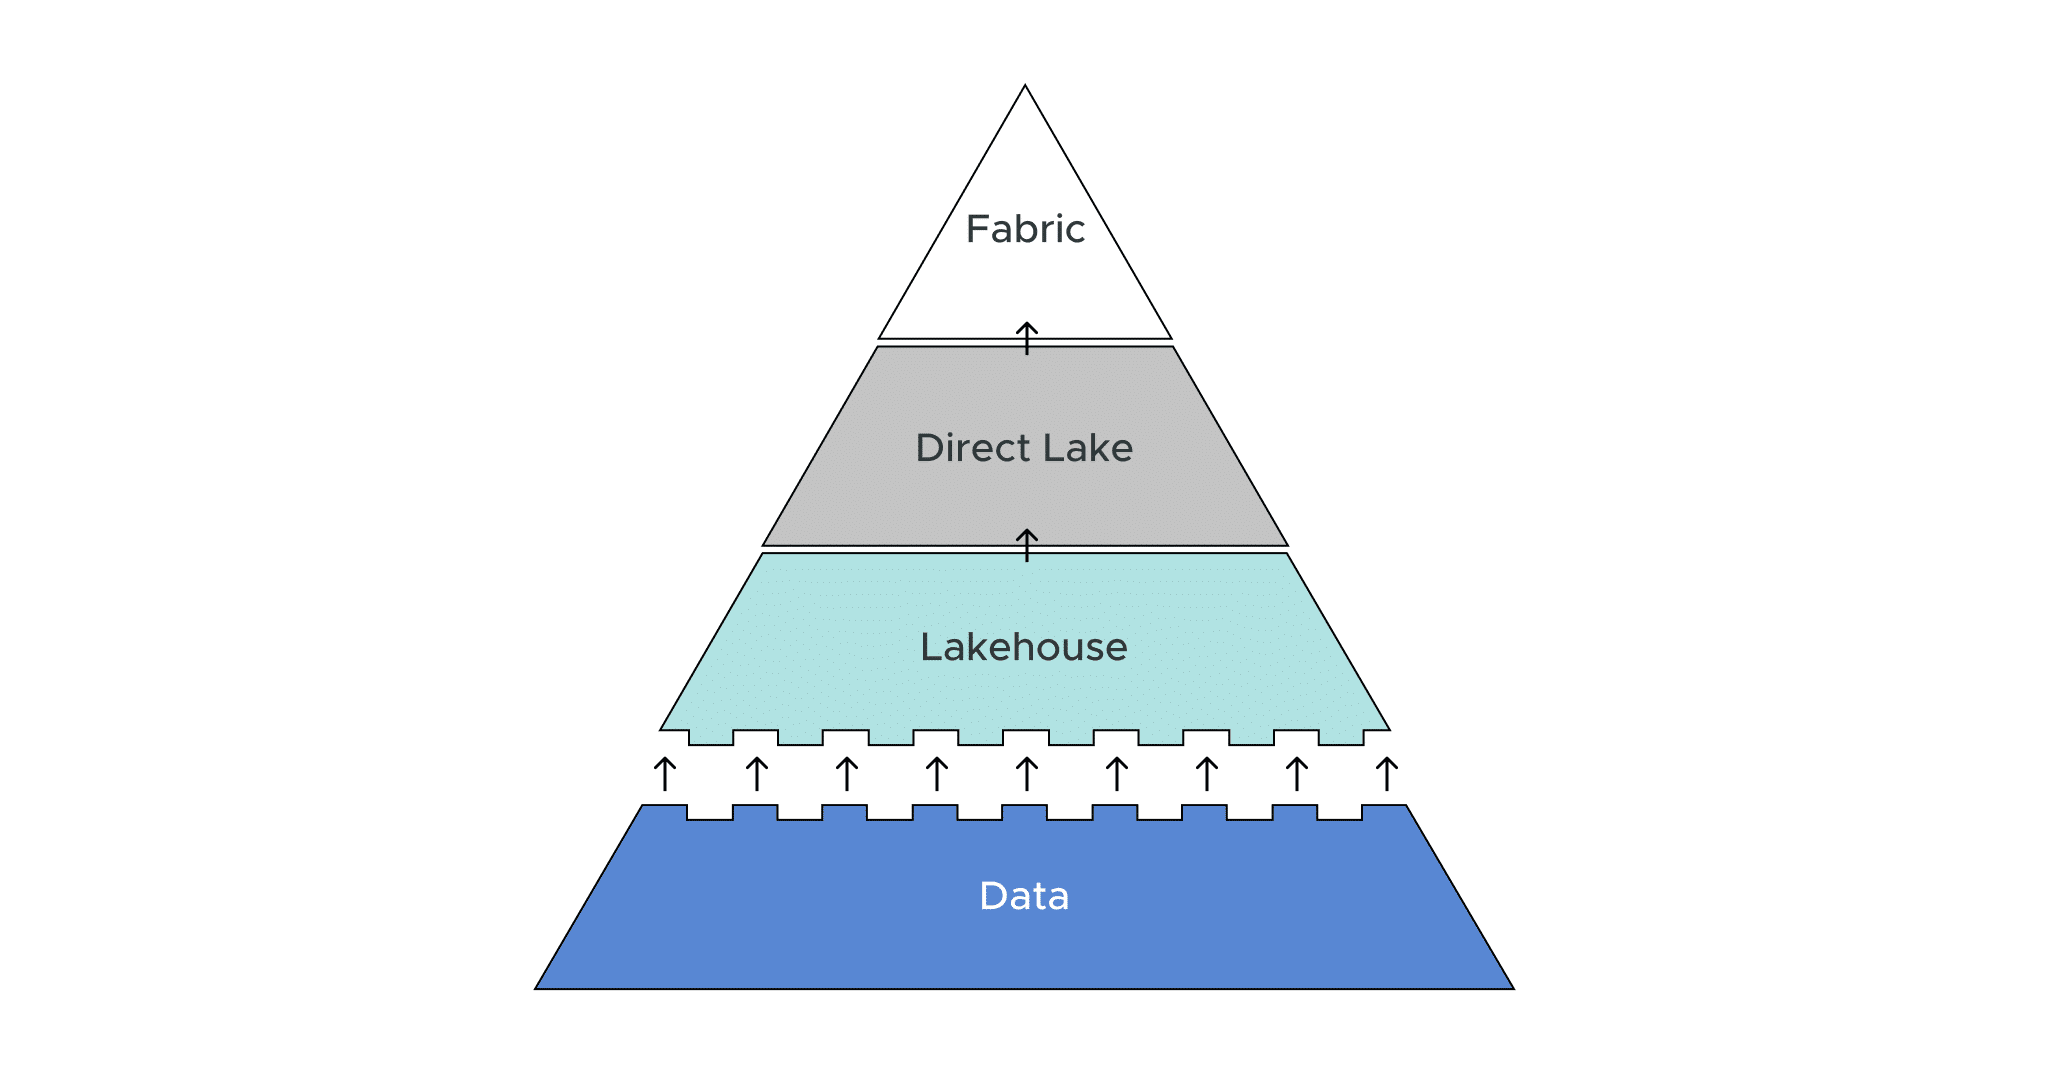 Does Fabric and Direct Lake Change the Competitive Landscape for Microsoft